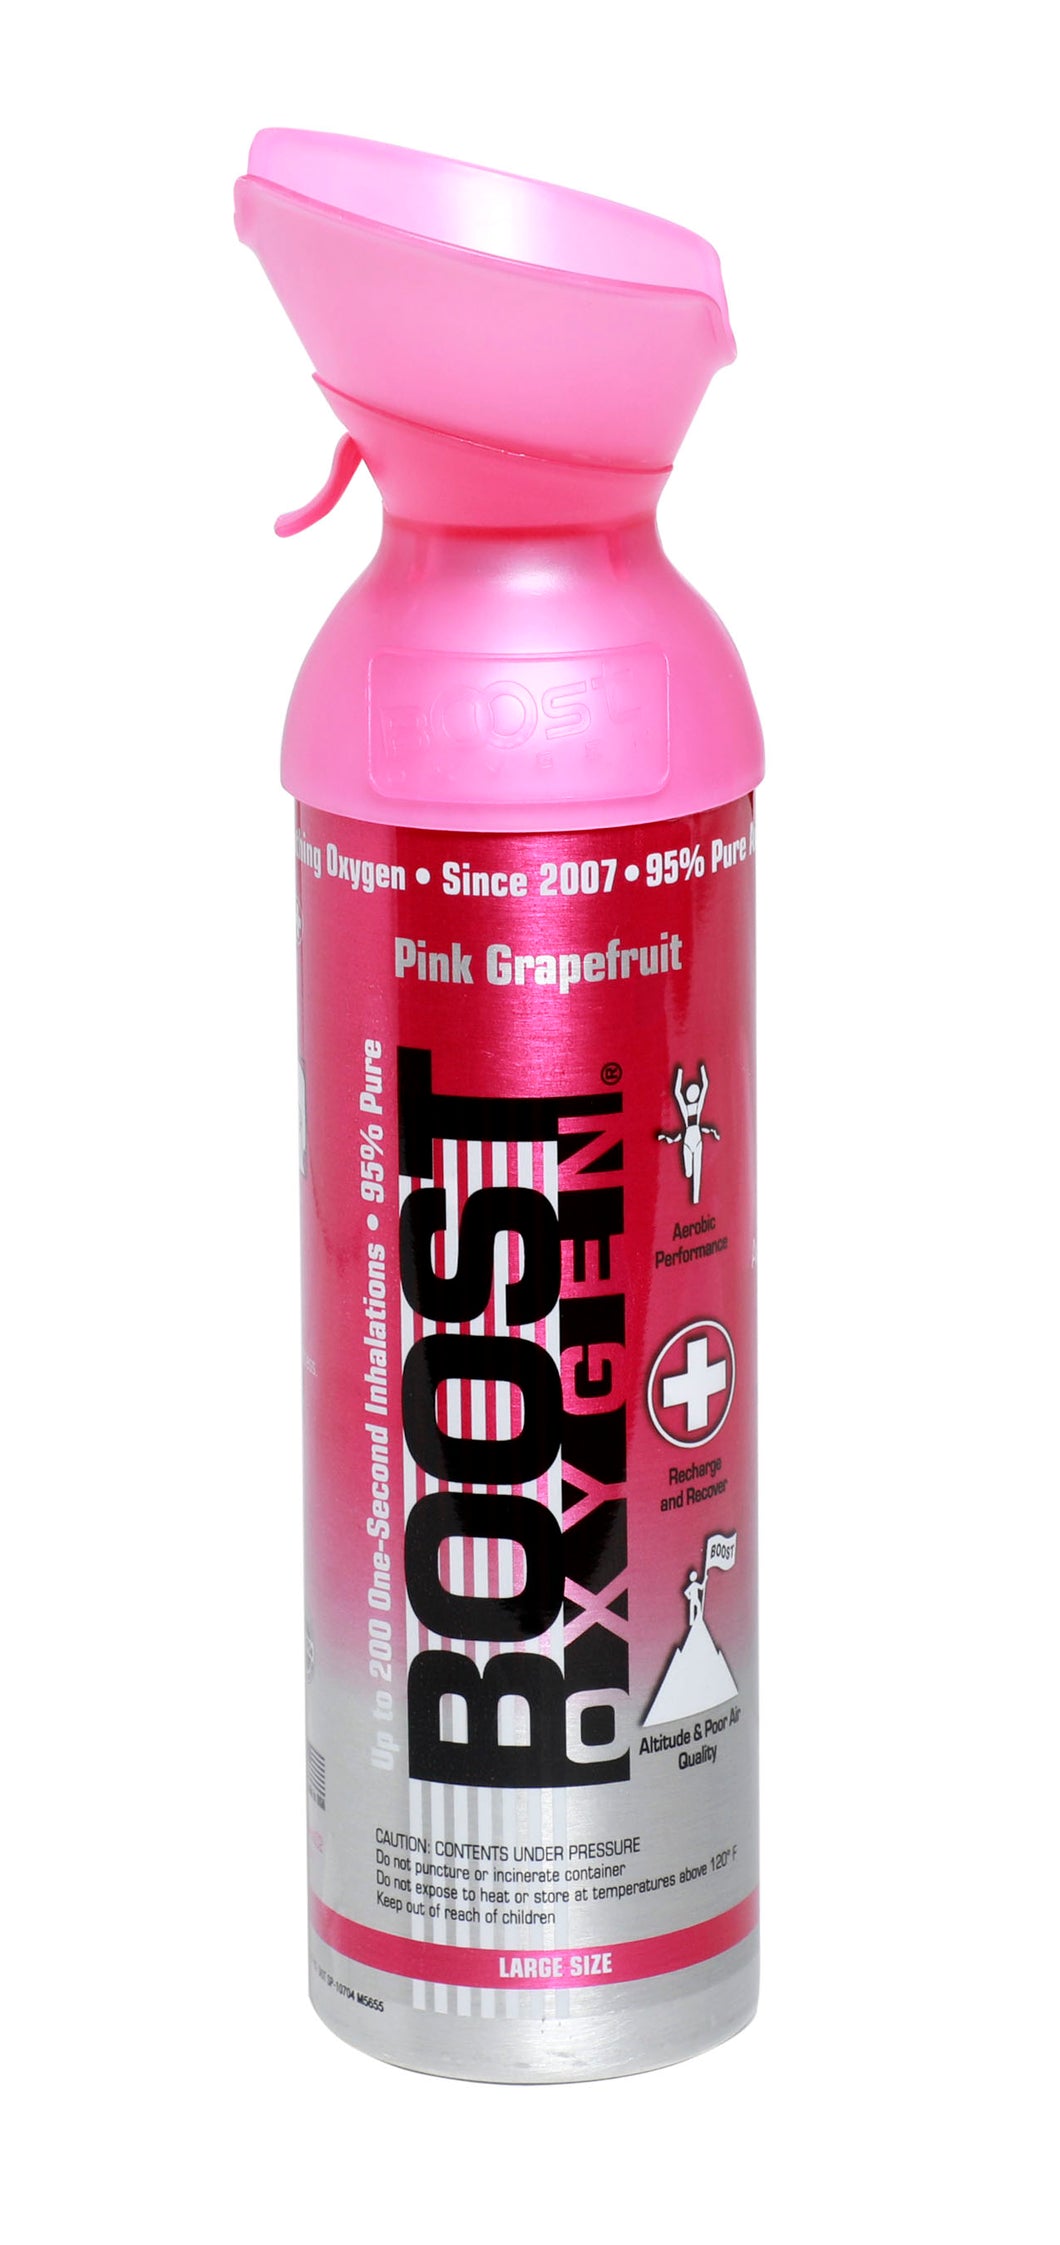 Pink Grapefruit 95% Pure Supplemental Oxygen in a portable Canister - 6 Liters